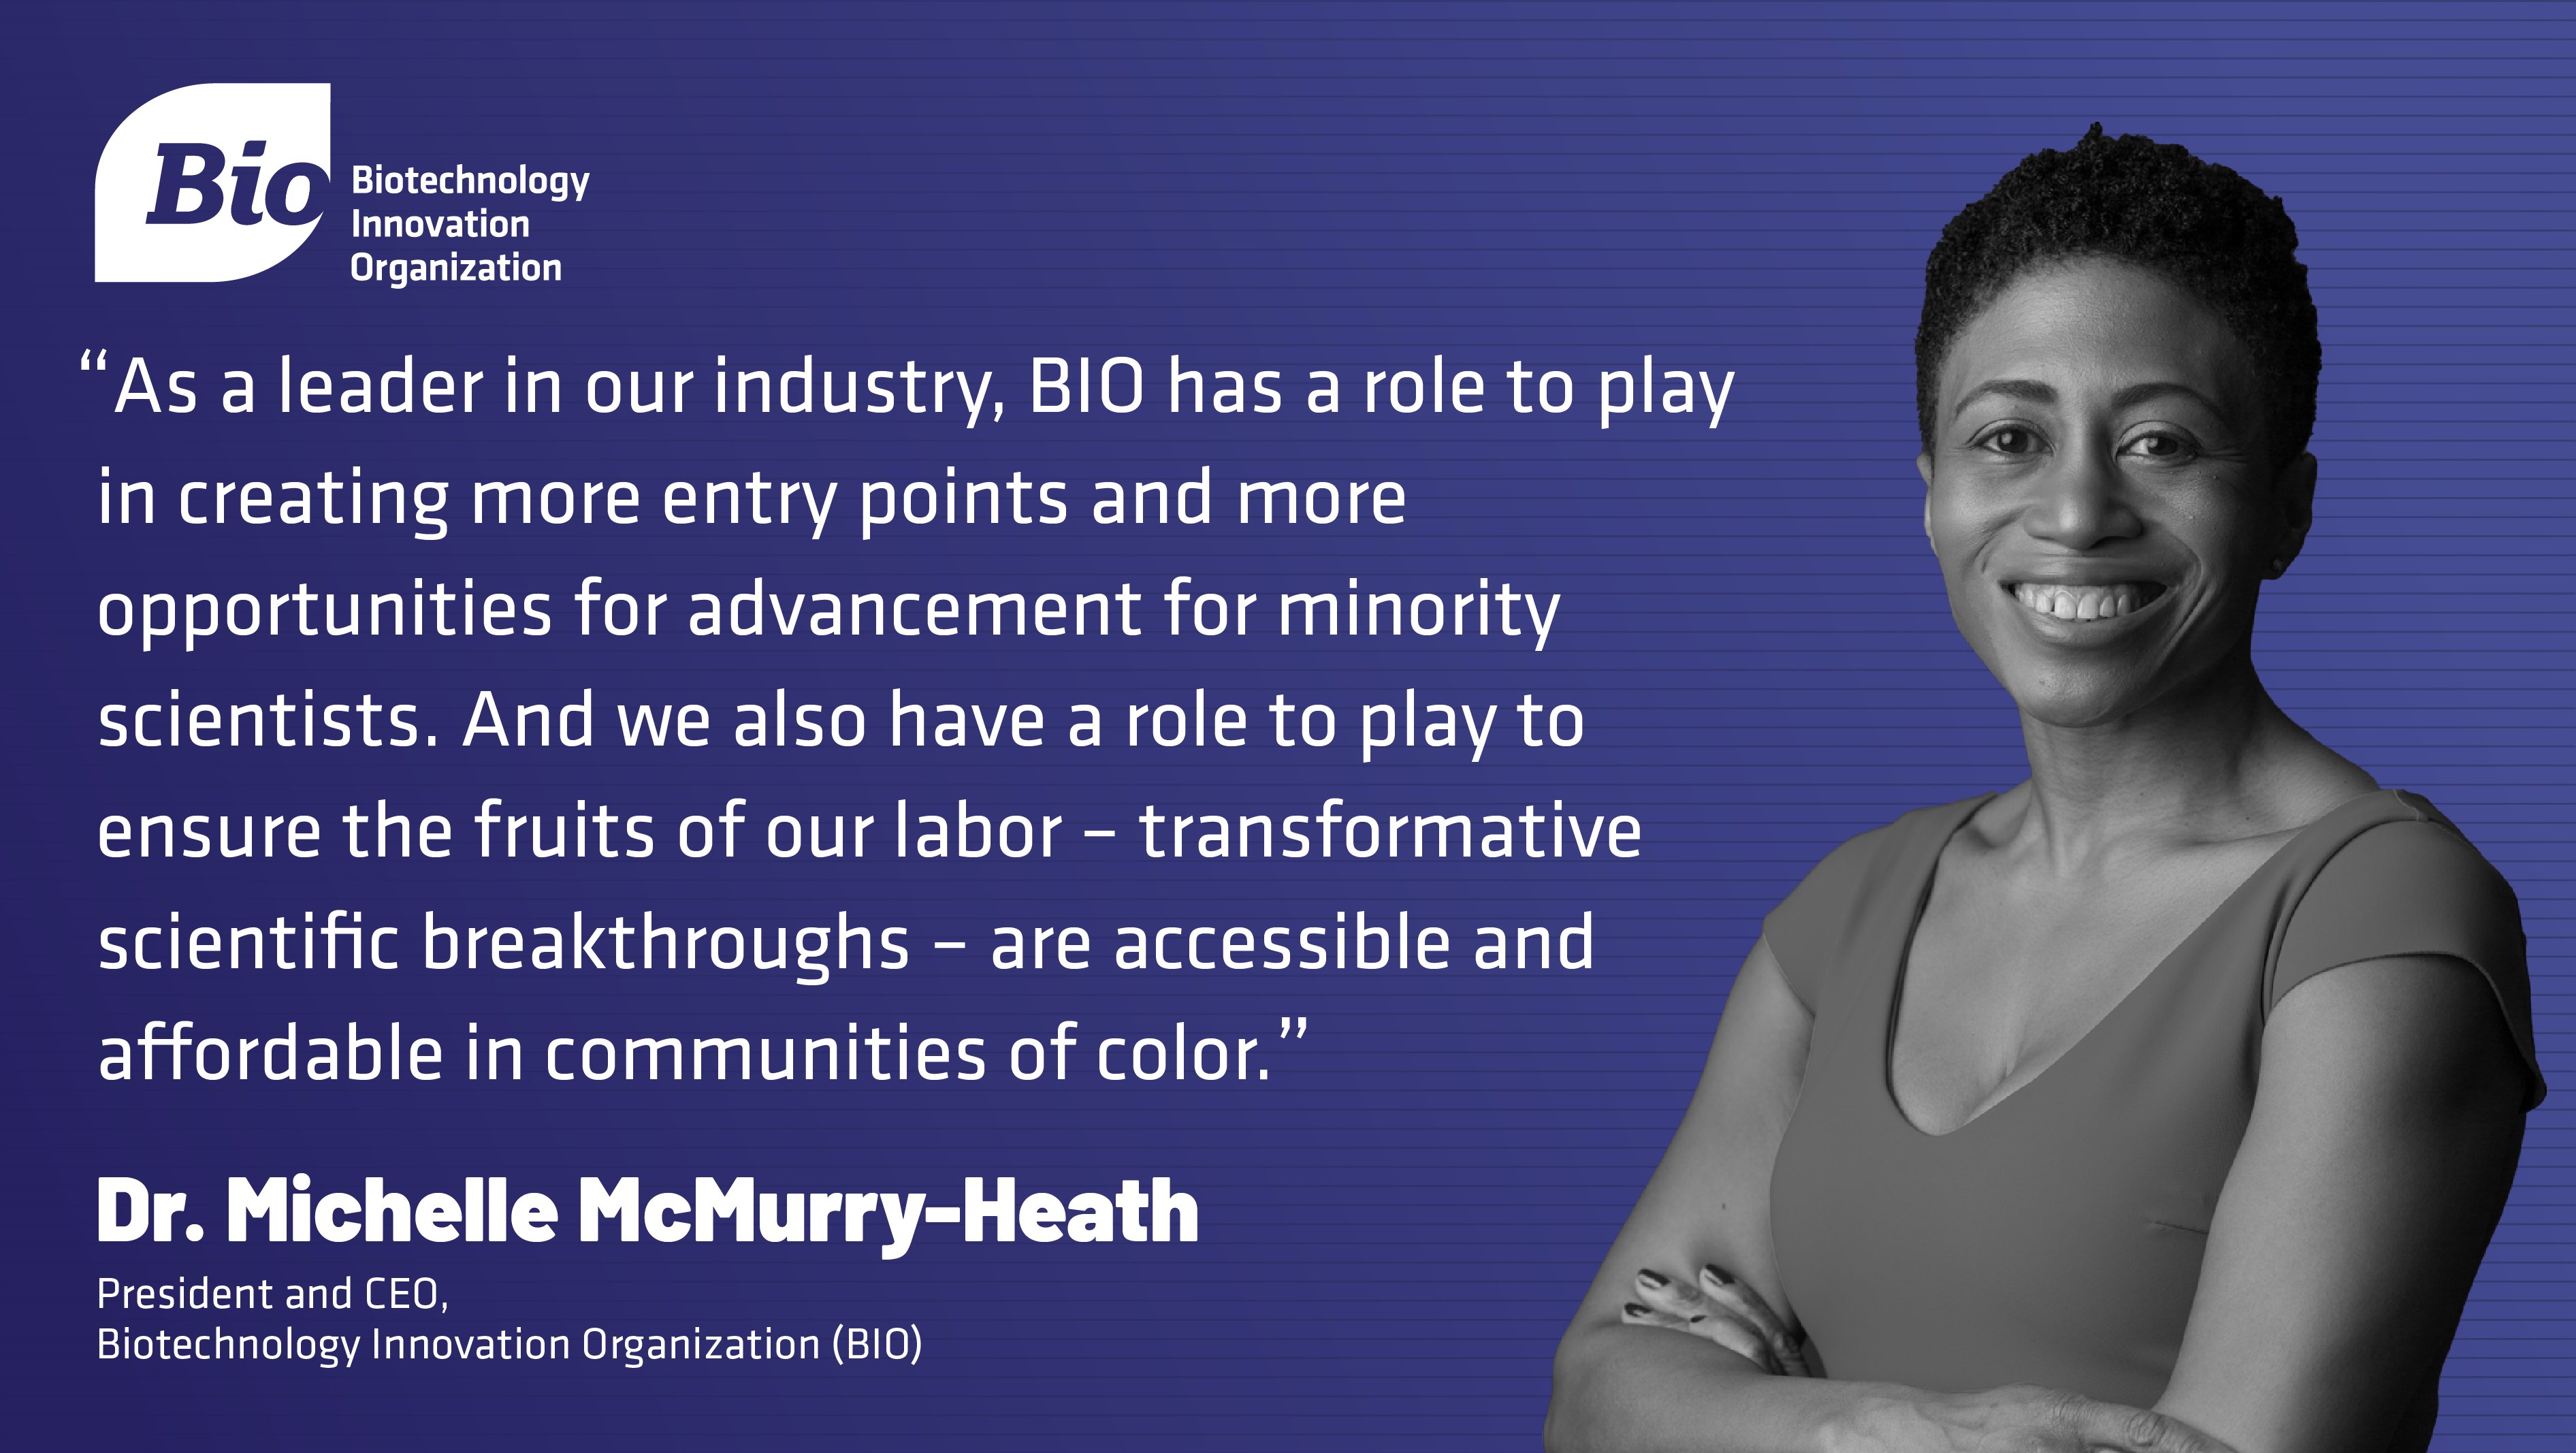 Dr. Michelle McMurry-Heath on BIO's Role in Diversity